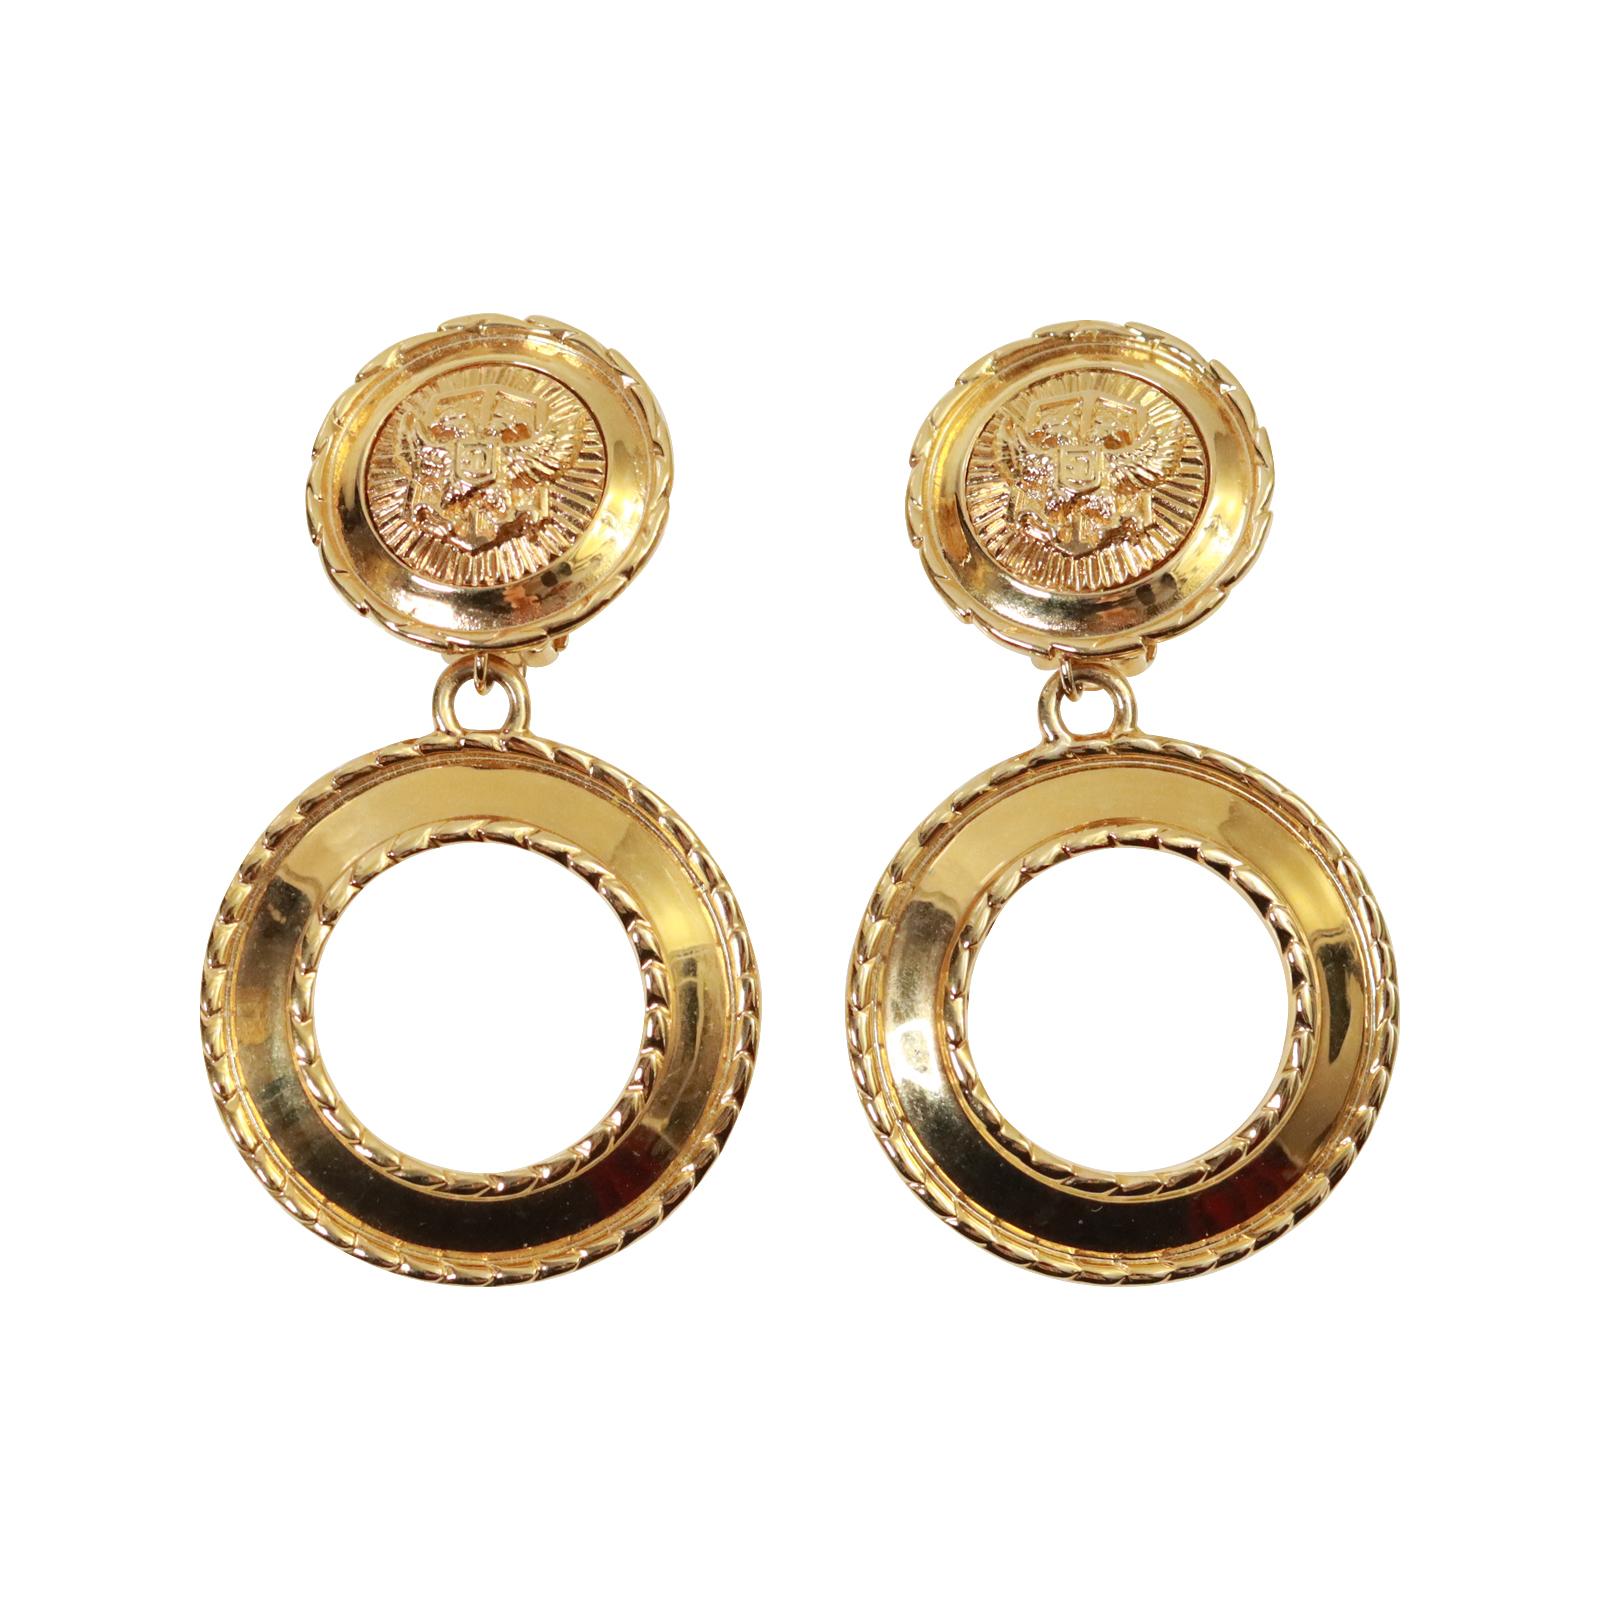 Vintage St John Gold Tone Hoop Earrings Circa 1980s. St John made some great jewelry in the 1980s.  These dangling gold hoops look so chic and stunning with everything. They have a medallion crest on the top part.  So reminiscent of the 1980's.